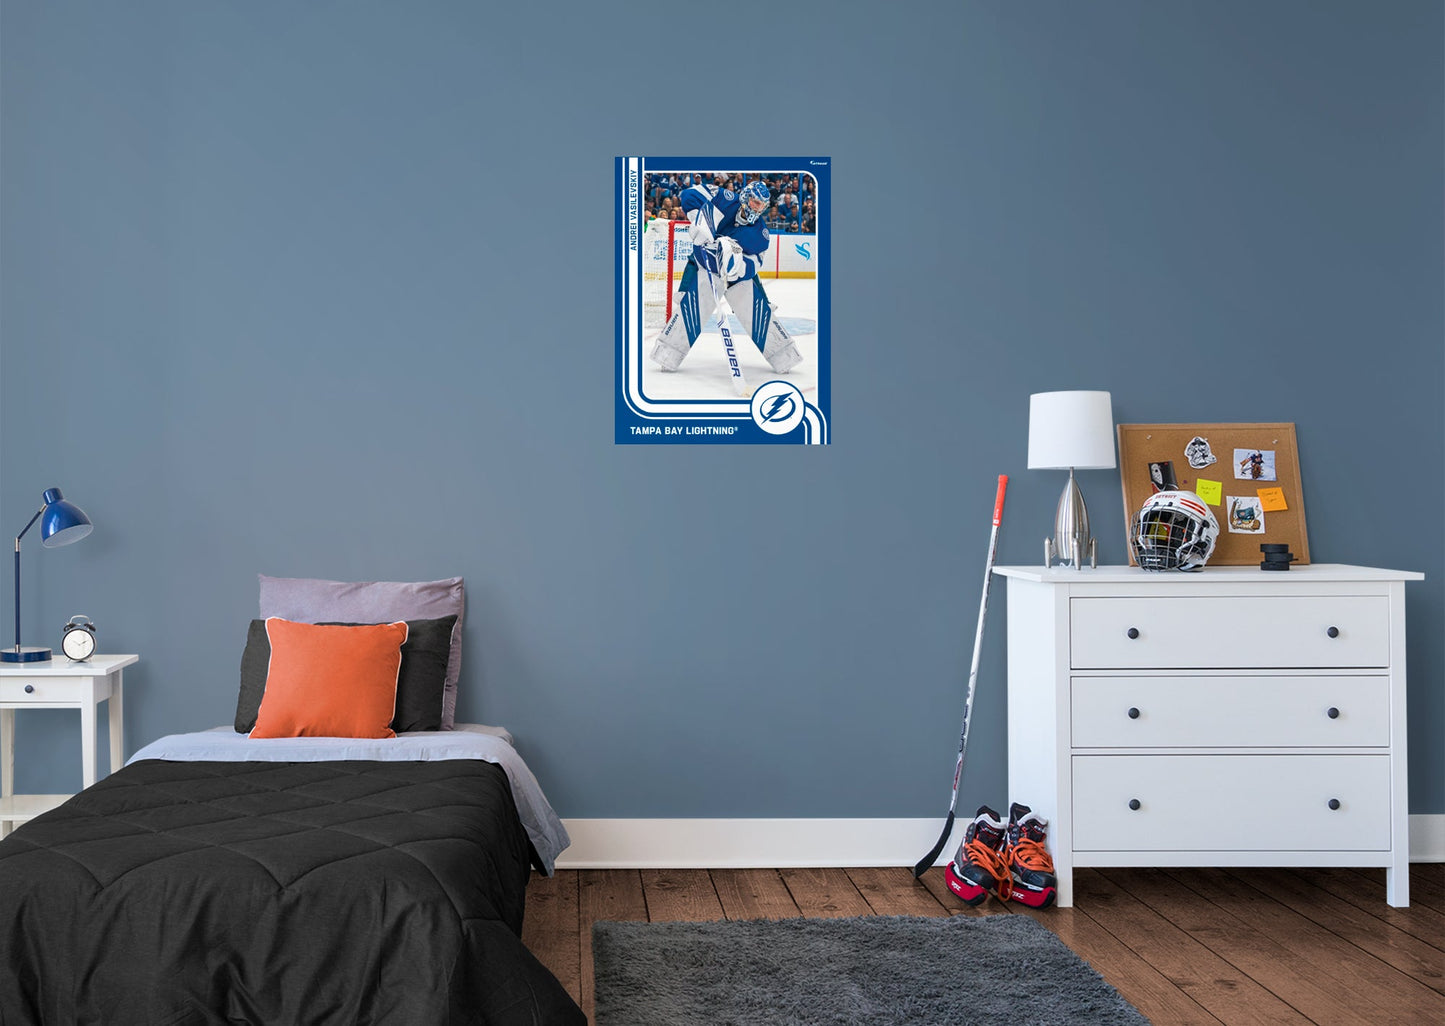 Tampa Bay Lightning: Andrei Vasilevskiy Poster - Officially Licensed NHL Removable Adhesive Decal